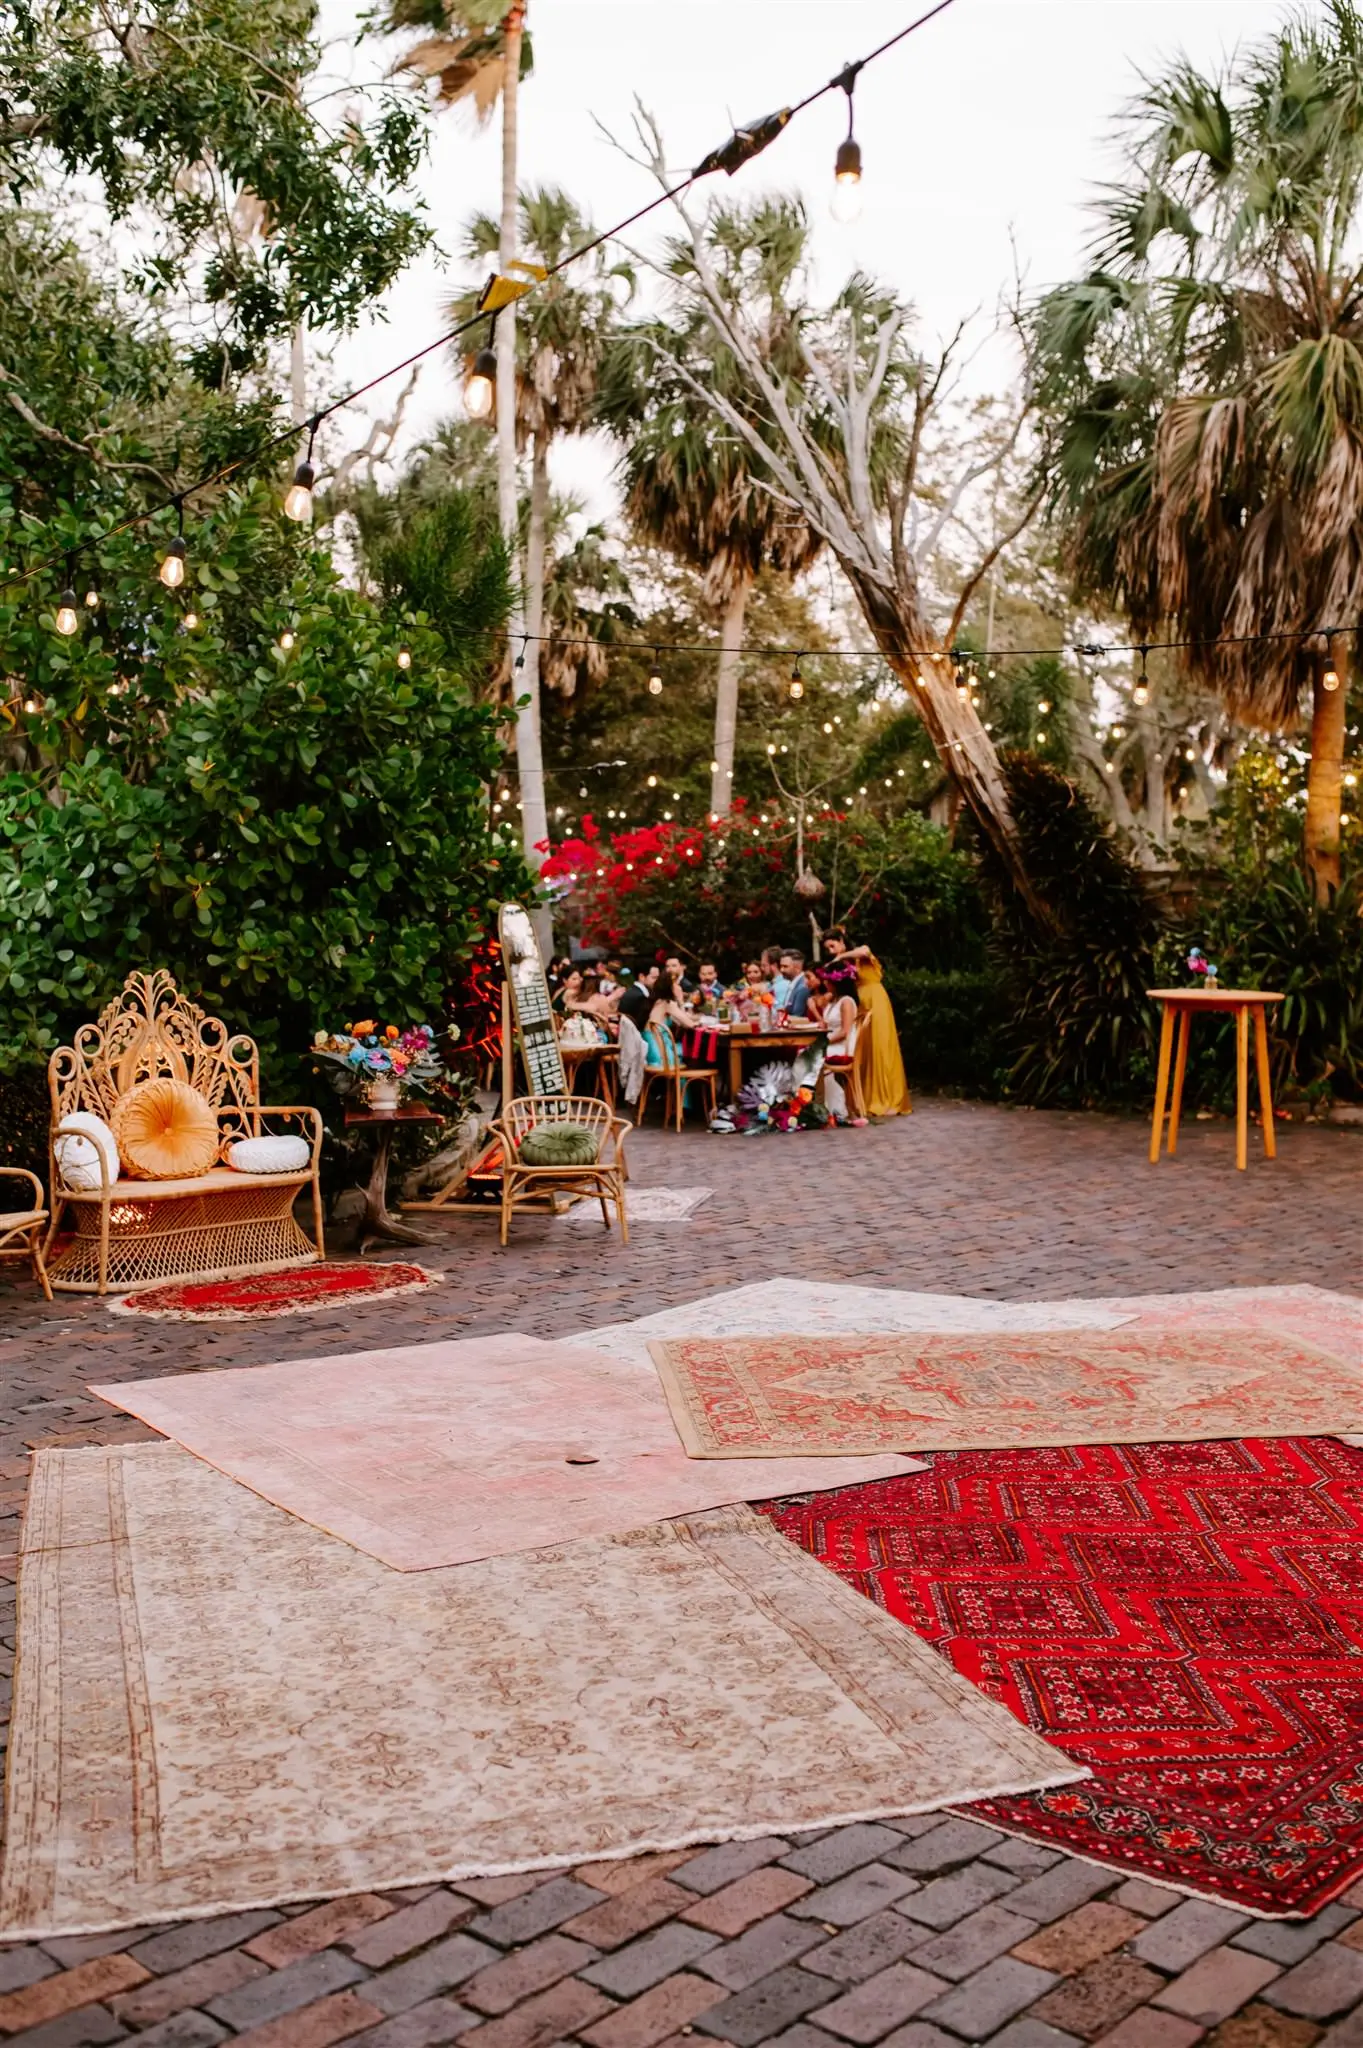 Boho Outdoor Wedding Reception with Red, Orange, and Beige Rugs Decor Ideas | St Pete Event Planner Wilder Mind Events